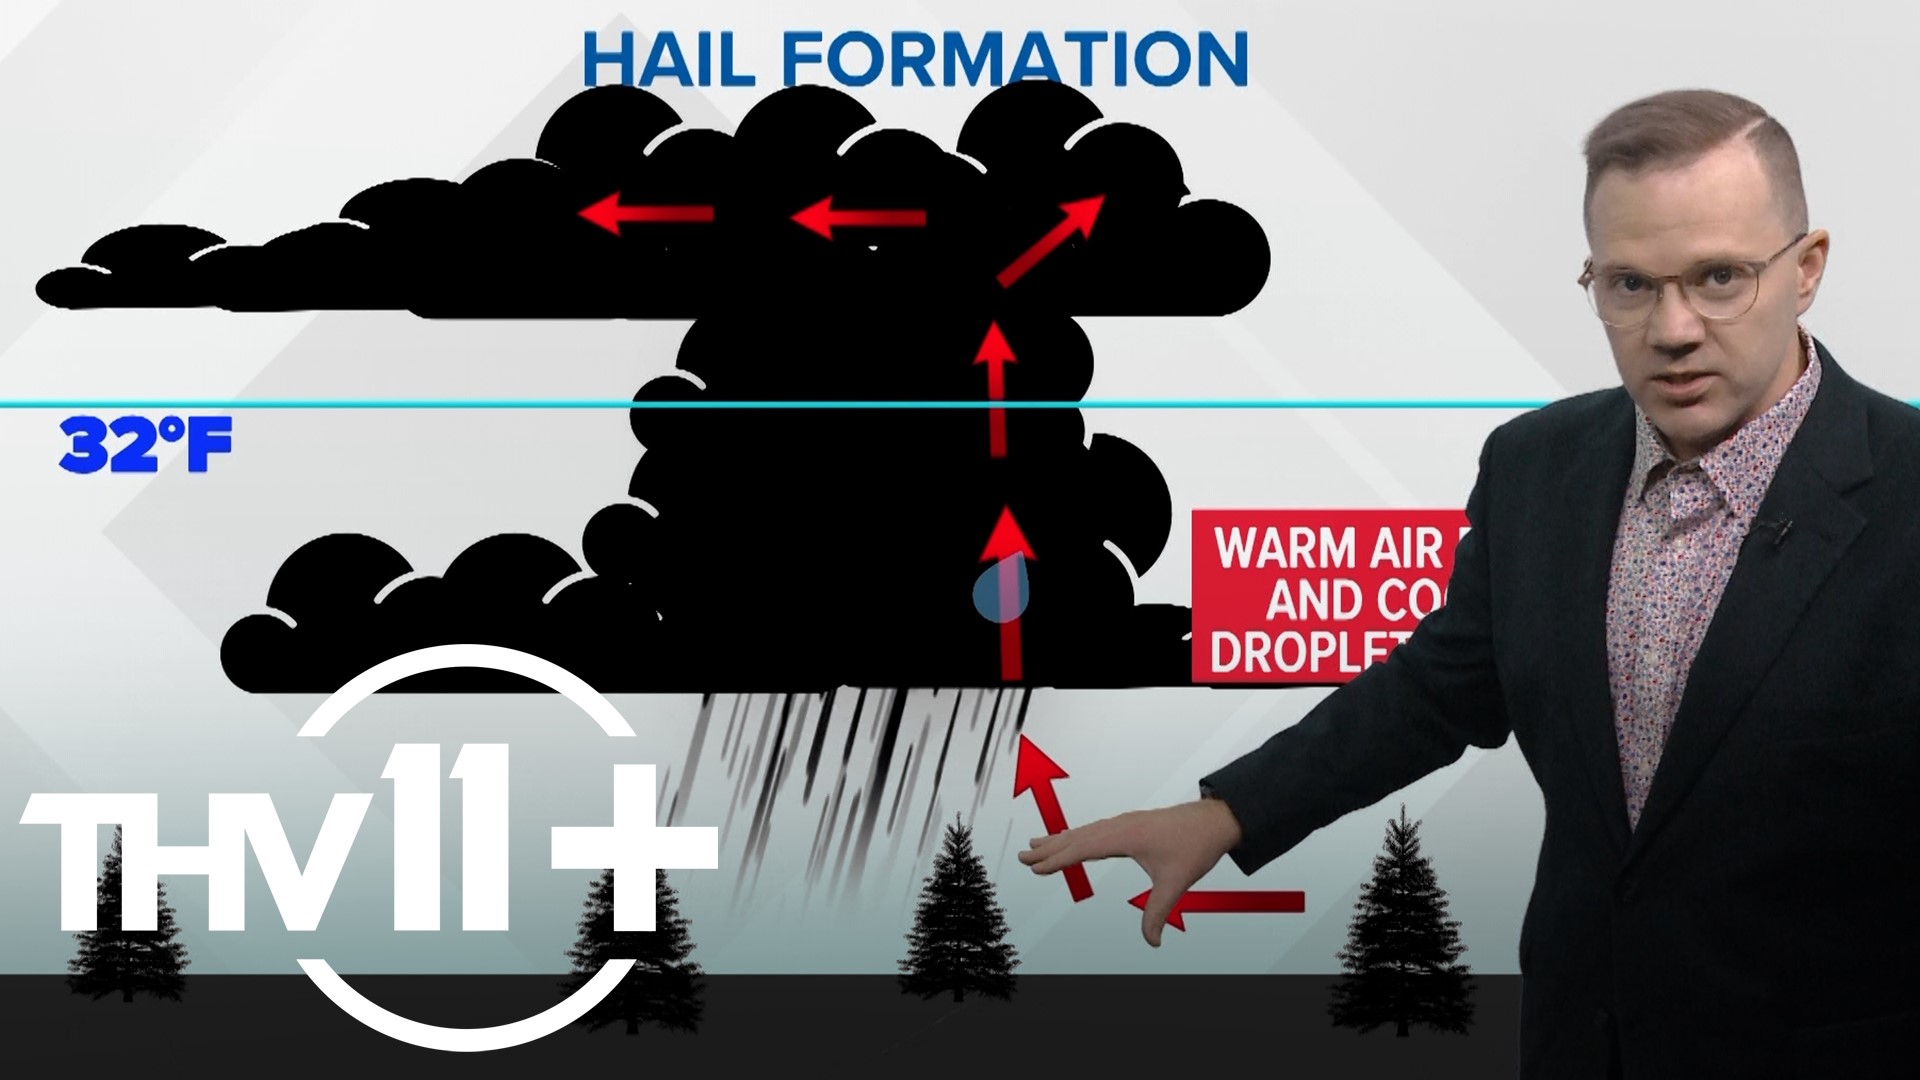 After a historic hail event in Arkansas, Meteorologist Skot Covert explained how hail forms and what causes it to happens.